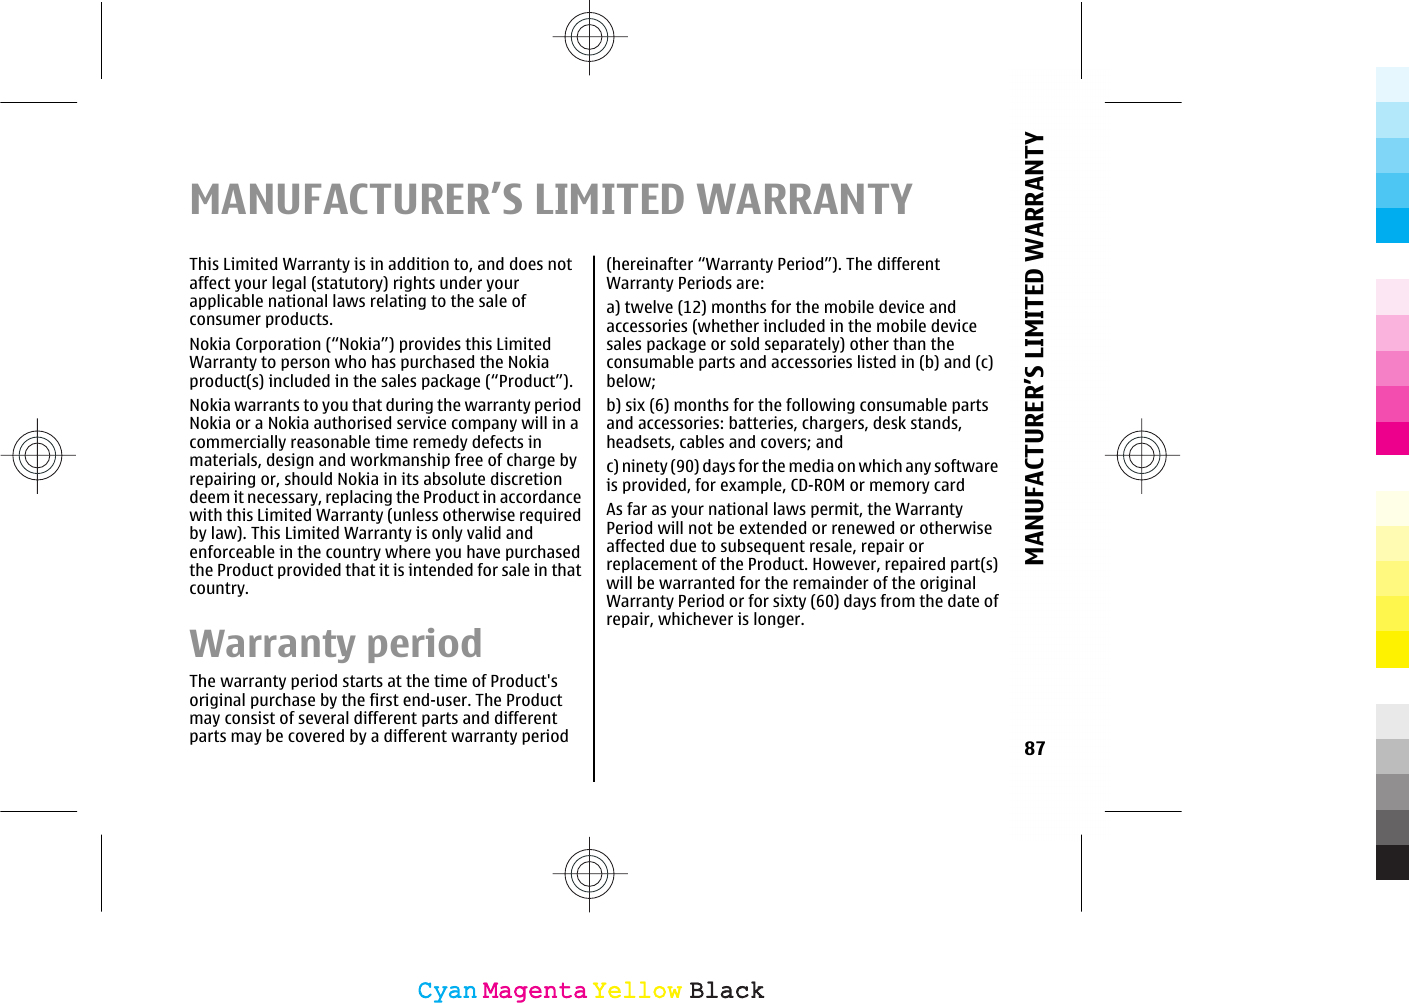 MANUFACTURER’S LIMITED WARRANTYThis Limited Warranty is in addition to, and does notaffect your legal (statutory) rights under yourapplicable national laws relating to the sale ofconsumer products.Nokia Corporation (“Nokia”) provides this LimitedWarranty to person who has purchased the Nokiaproduct(s) included in the sales package (“Product”).Nokia warrants to you that during the warranty periodNokia or a Nokia authorised service company will in acommercially reasonable time remedy defects inmaterials, design and workmanship free of charge byrepairing or, should Nokia in its absolute discretiondeem it necessary, replacing the Product in accordancewith this Limited Warranty (unless otherwise requiredby law). This Limited Warranty is only valid andenforceable in the country where you have purchasedthe Product provided that it is intended for sale in thatcountry.Warranty periodThe warranty period starts at the time of Product&apos;soriginal purchase by the first end-user. The Productmay consist of several different parts and differentparts may be covered by a different warranty period(hereinafter “Warranty Period”). The differentWarranty Periods are:a) twelve (12) months for the mobile device andaccessories (whether included in the mobile devicesales package or sold separately) other than theconsumable parts and accessories listed in (b) and (c)below;b) six (6) months for the following consumable partsand accessories: batteries, chargers, desk stands,headsets, cables and covers; andc) ninety (90) days for the media on which any softwareis provided, for example, CD-ROM or memory cardAs far as your national laws permit, the WarrantyPeriod will not be extended or renewed or otherwiseaffected due to subsequent resale, repair orreplacement of the Product. However, repaired part(s)will be warranted for the remainder of the originalWarranty Period or for sixty (60) days from the date ofrepair, whichever is longer.87MANUFACTURER’S LIMITED WARRANTYCyanCyanMagentaMagentaYellowYellowBlackBlack